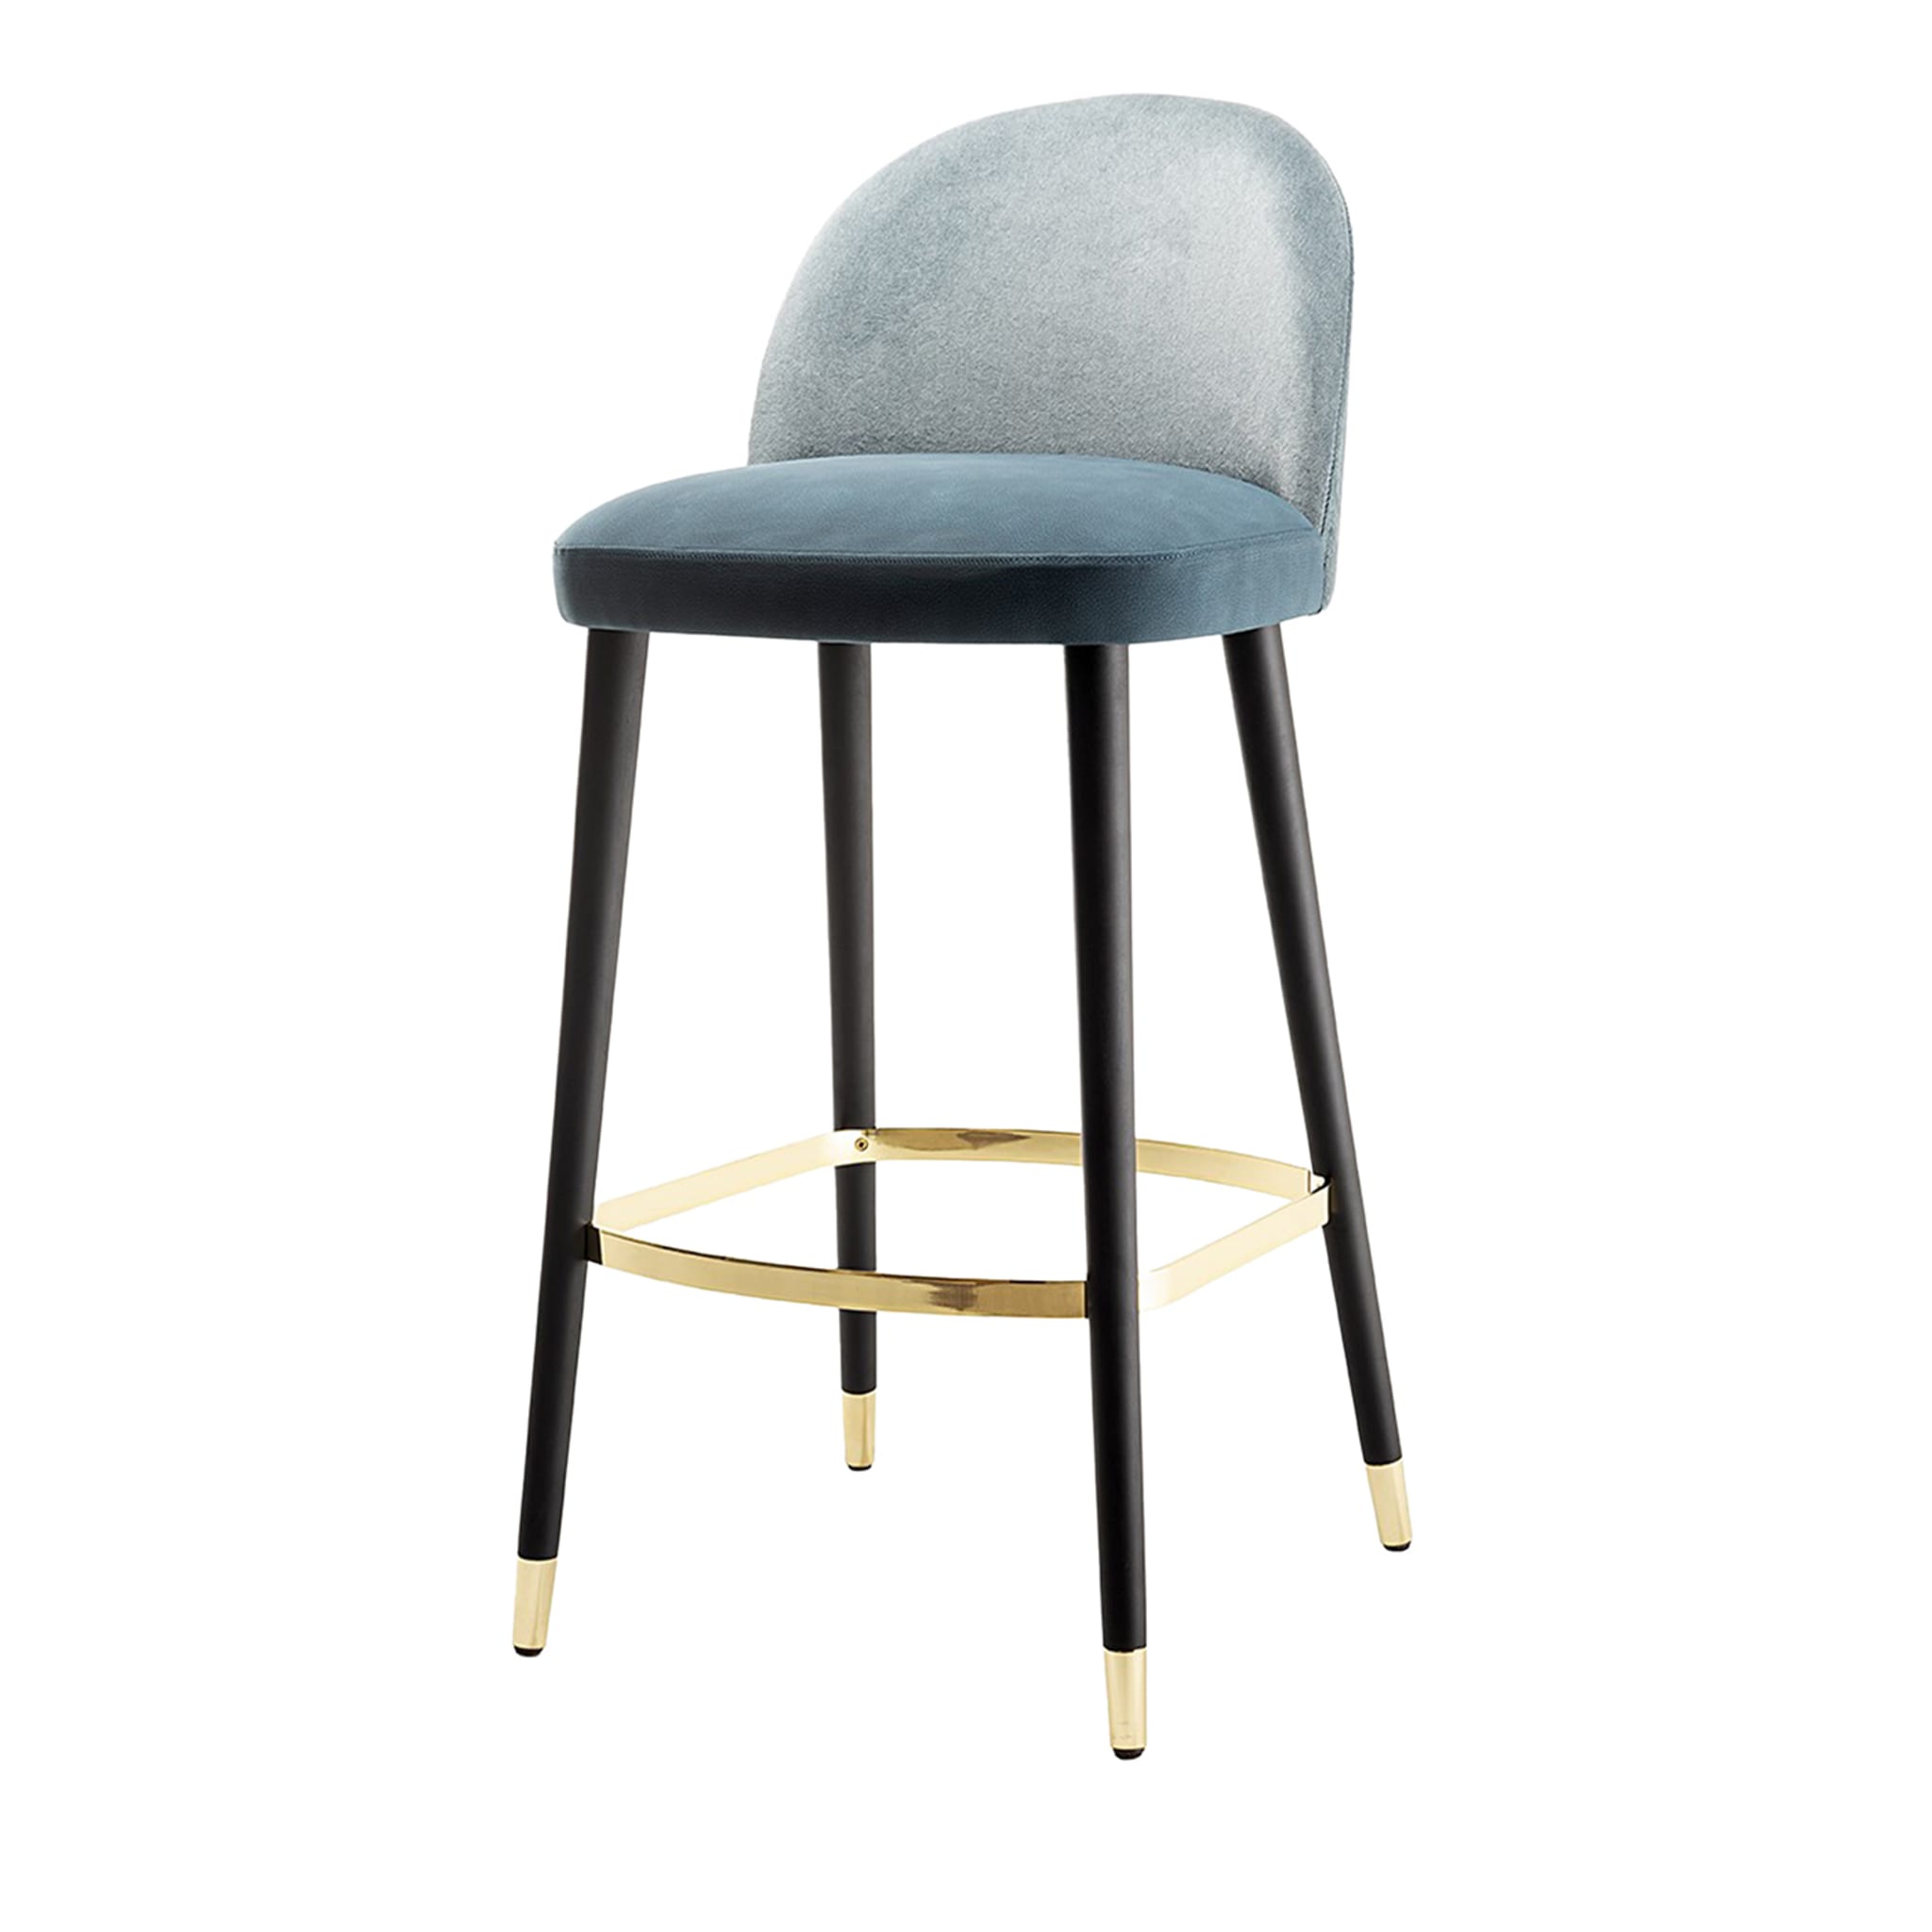 AES 898 Light Blue Bar Stool by Claudio Perin - Main view